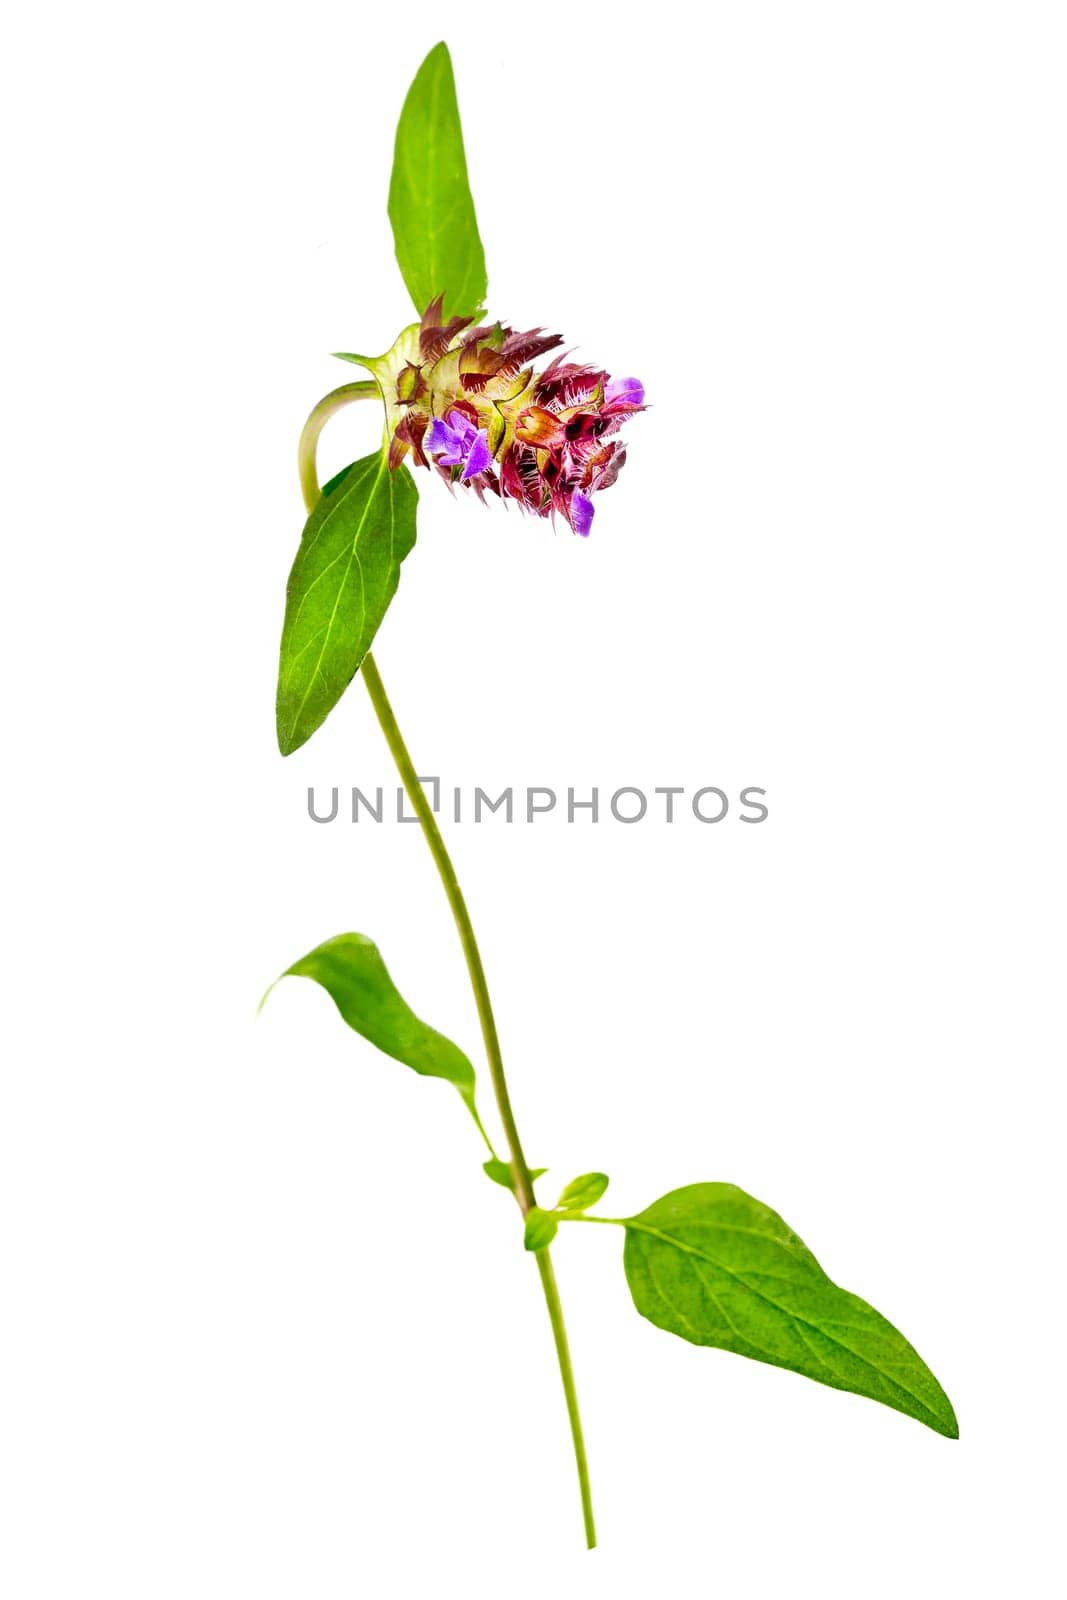 Selfheal, Prunella vulgaris isolated on white background, this plant is medical and edible, by JPC-PROD